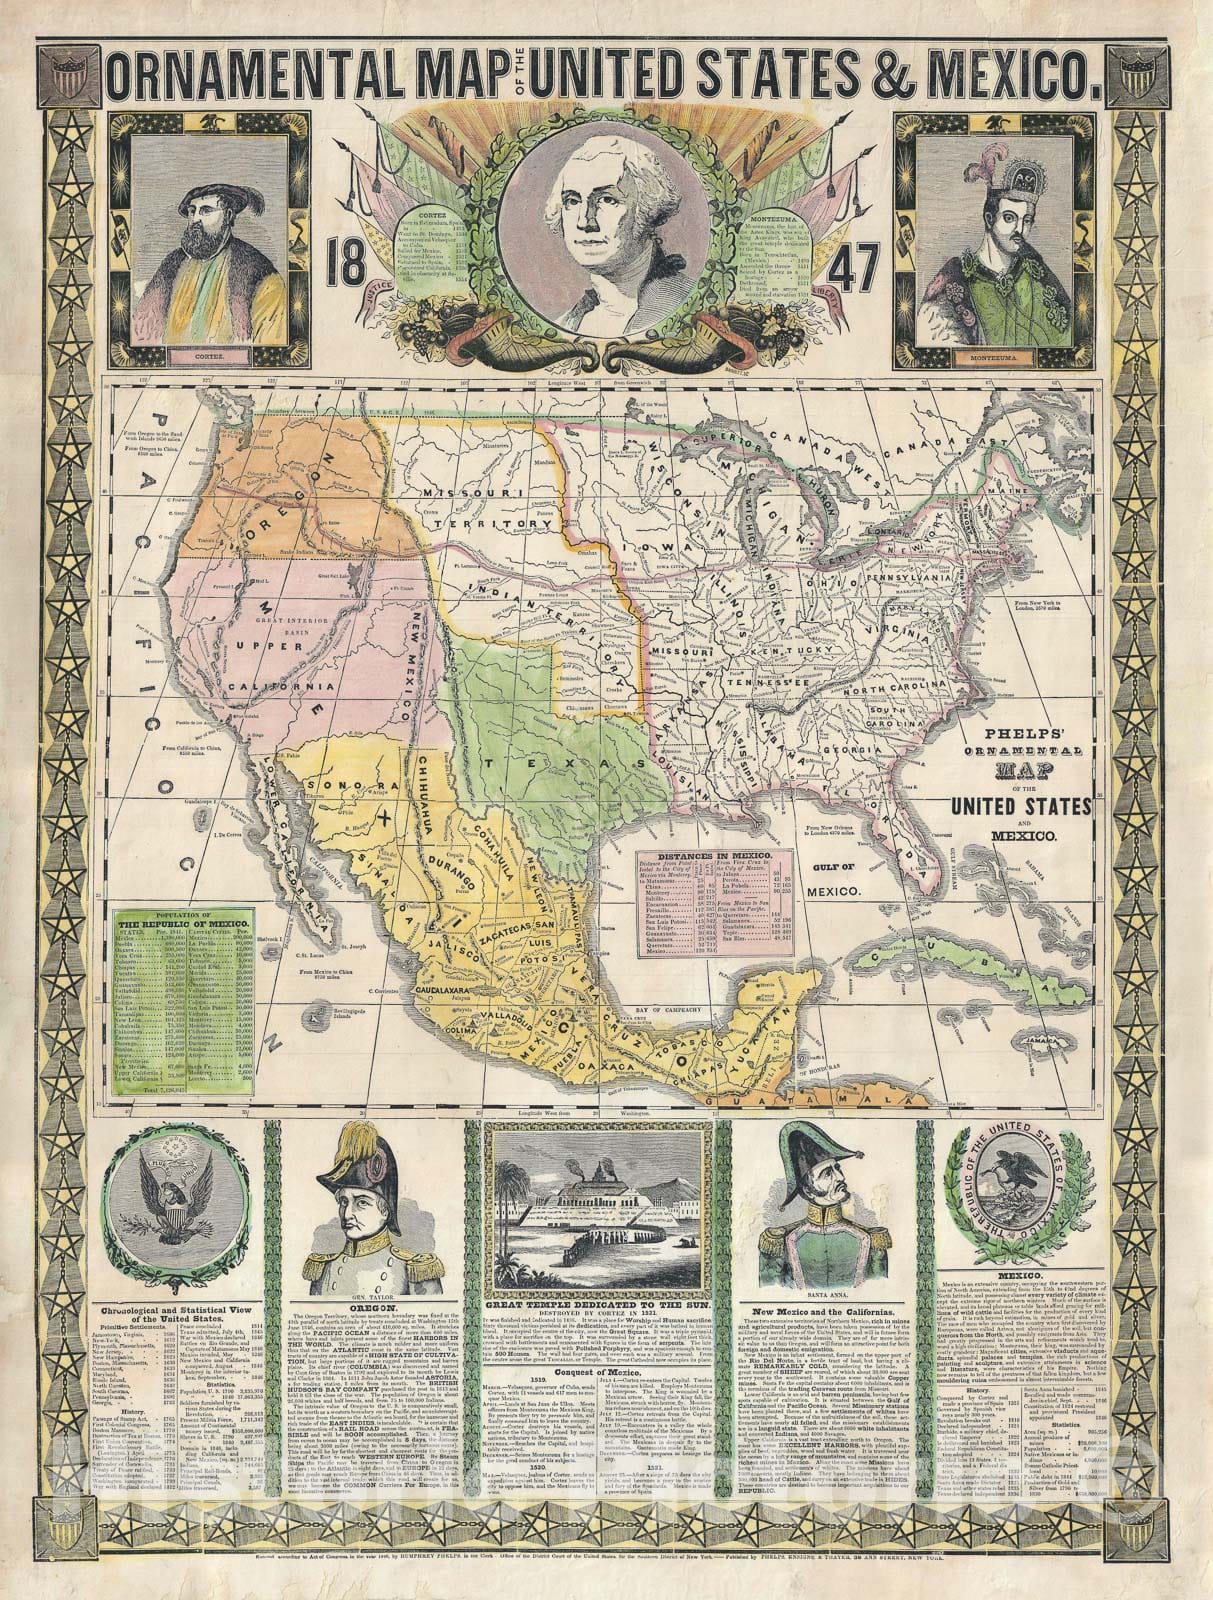 Historic Map : Propaganda Map of The Untied States "Manifest Destiny", Phelps, 1847, Vintage Wall Art